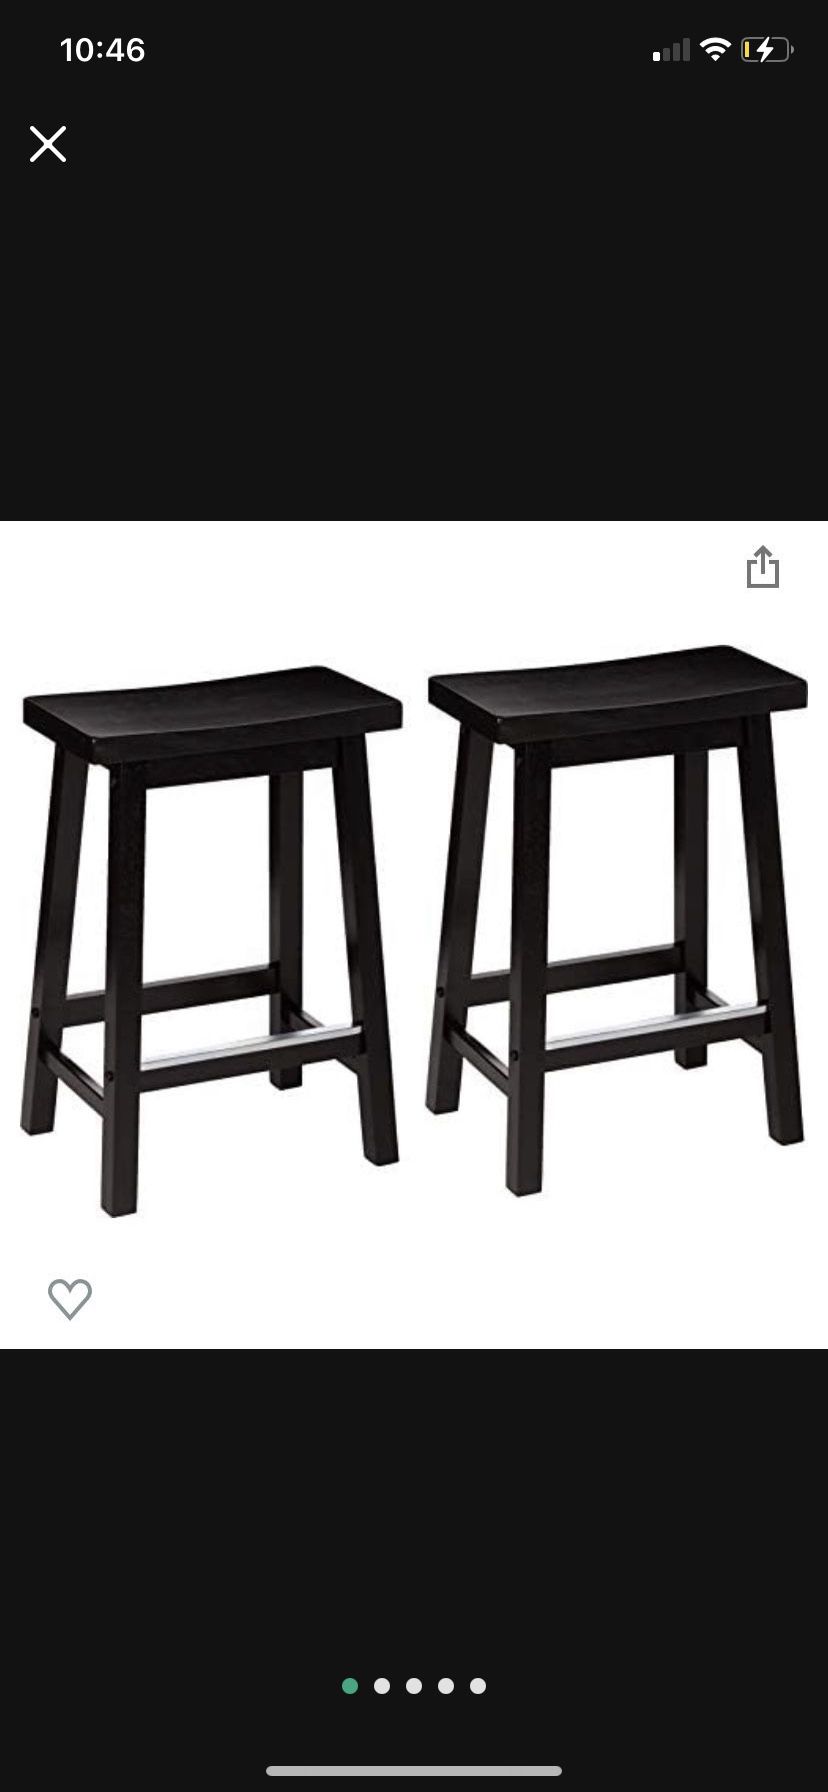 New In Box Stools